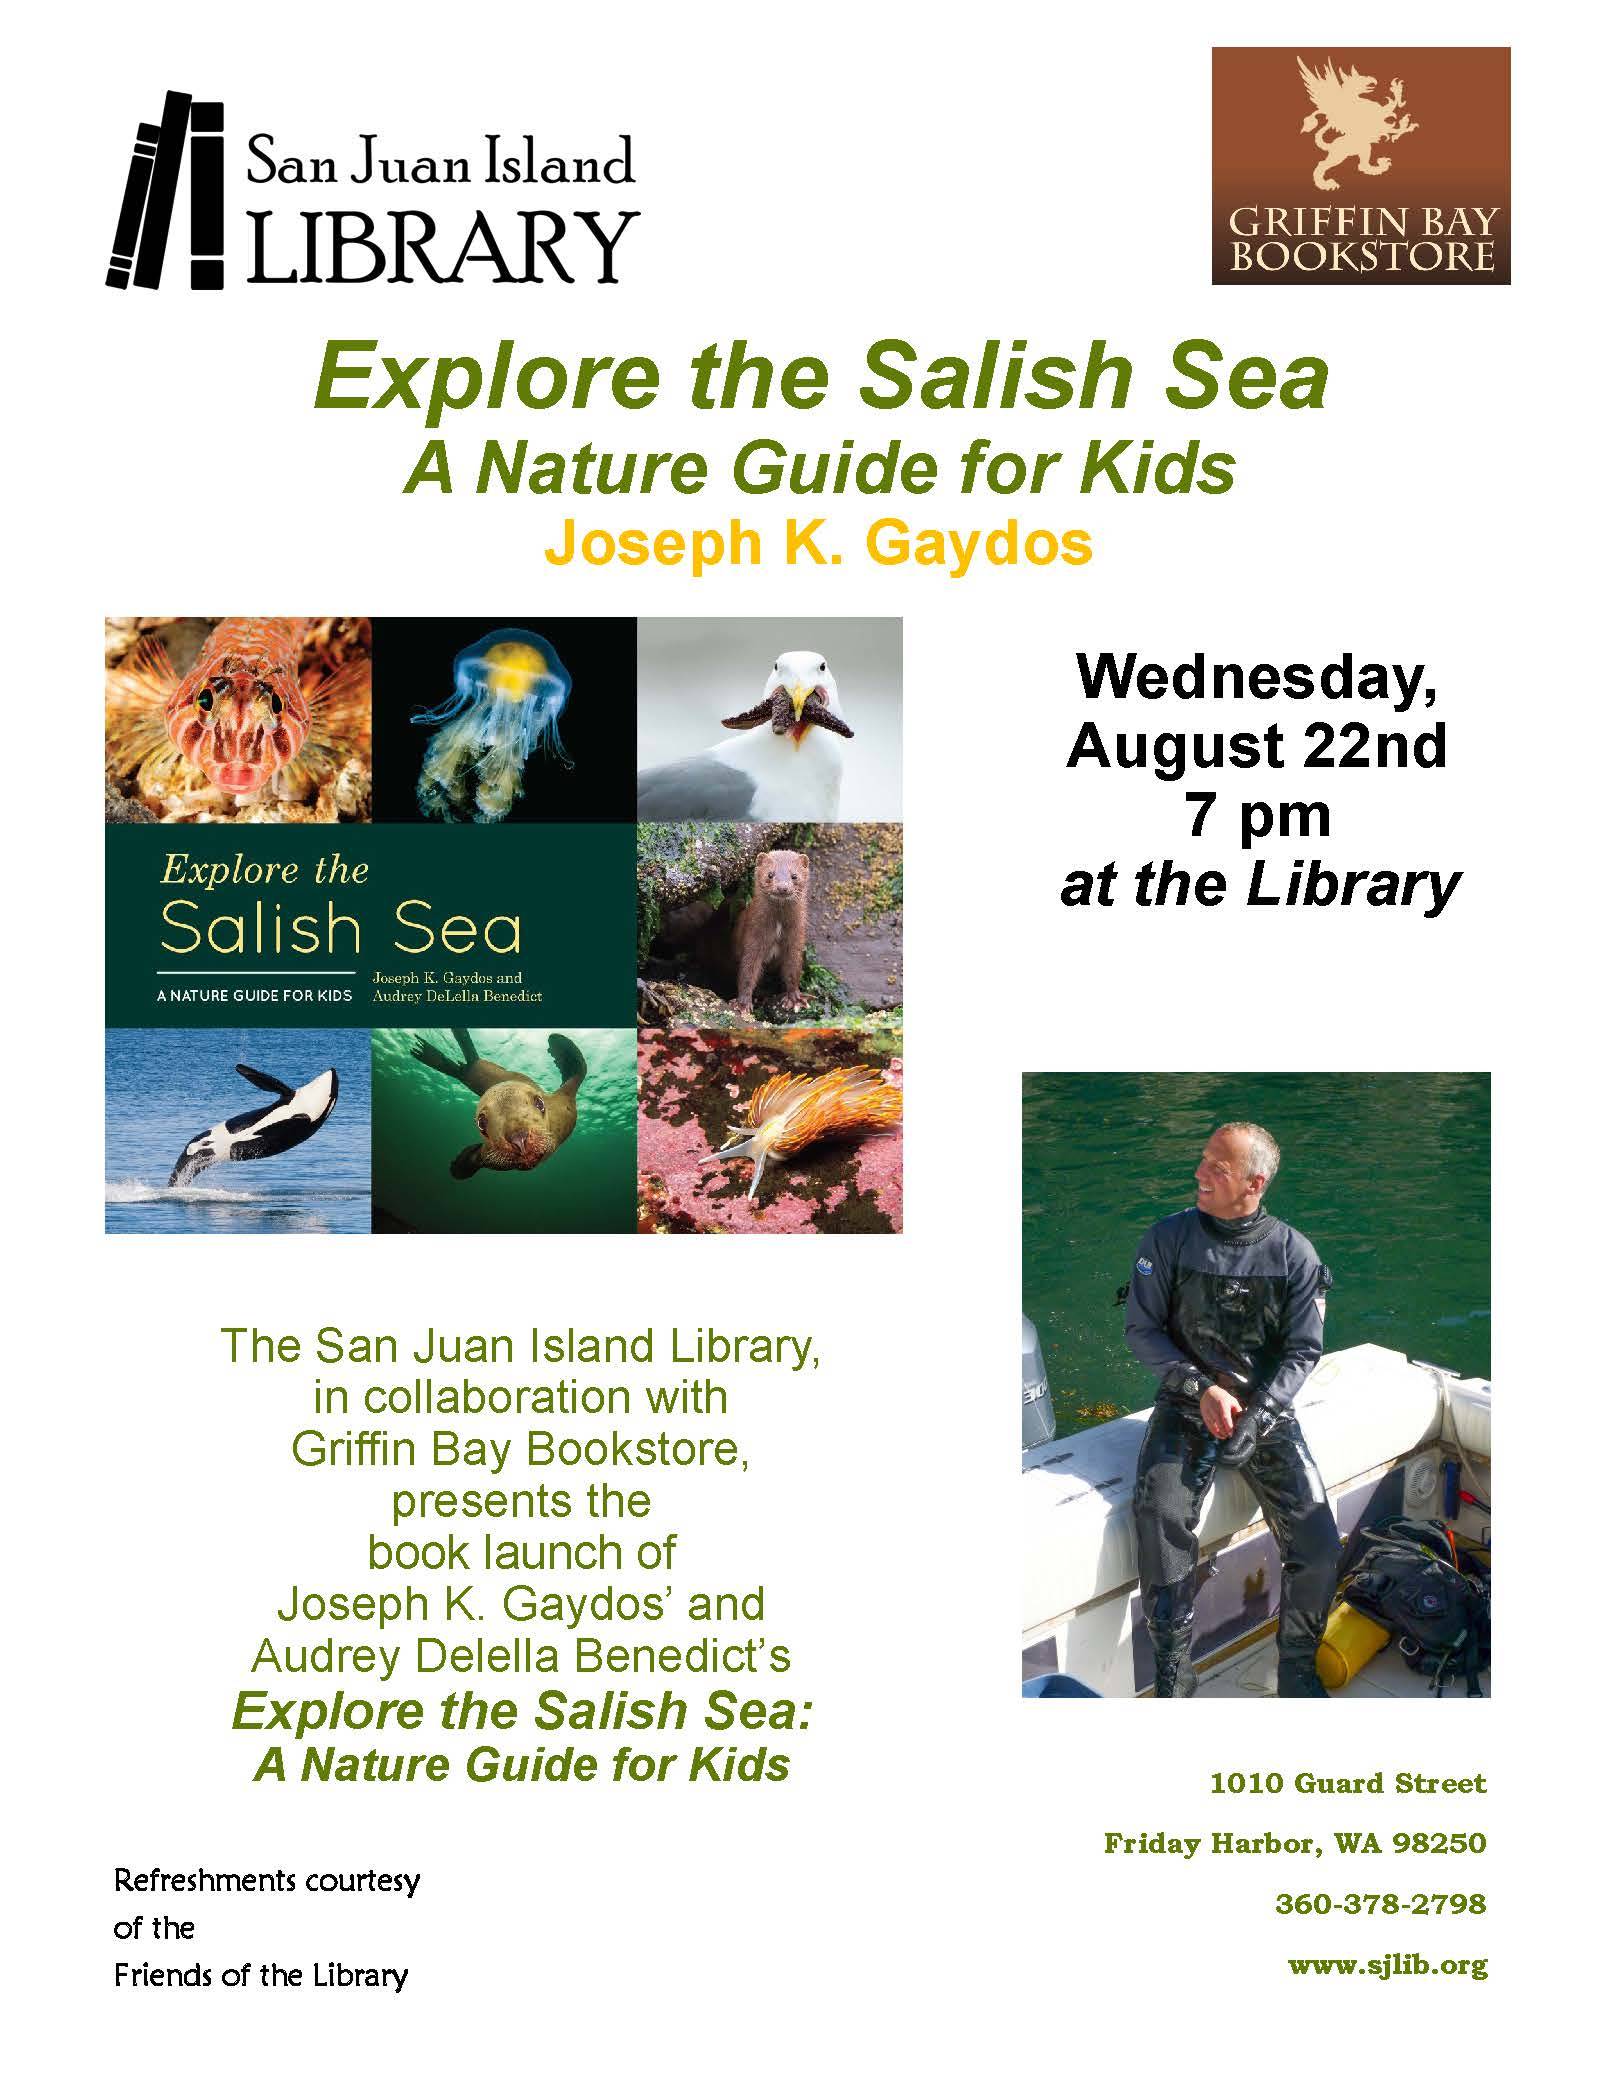 Learn about SeaDoc children’s book at San Juan Island Library